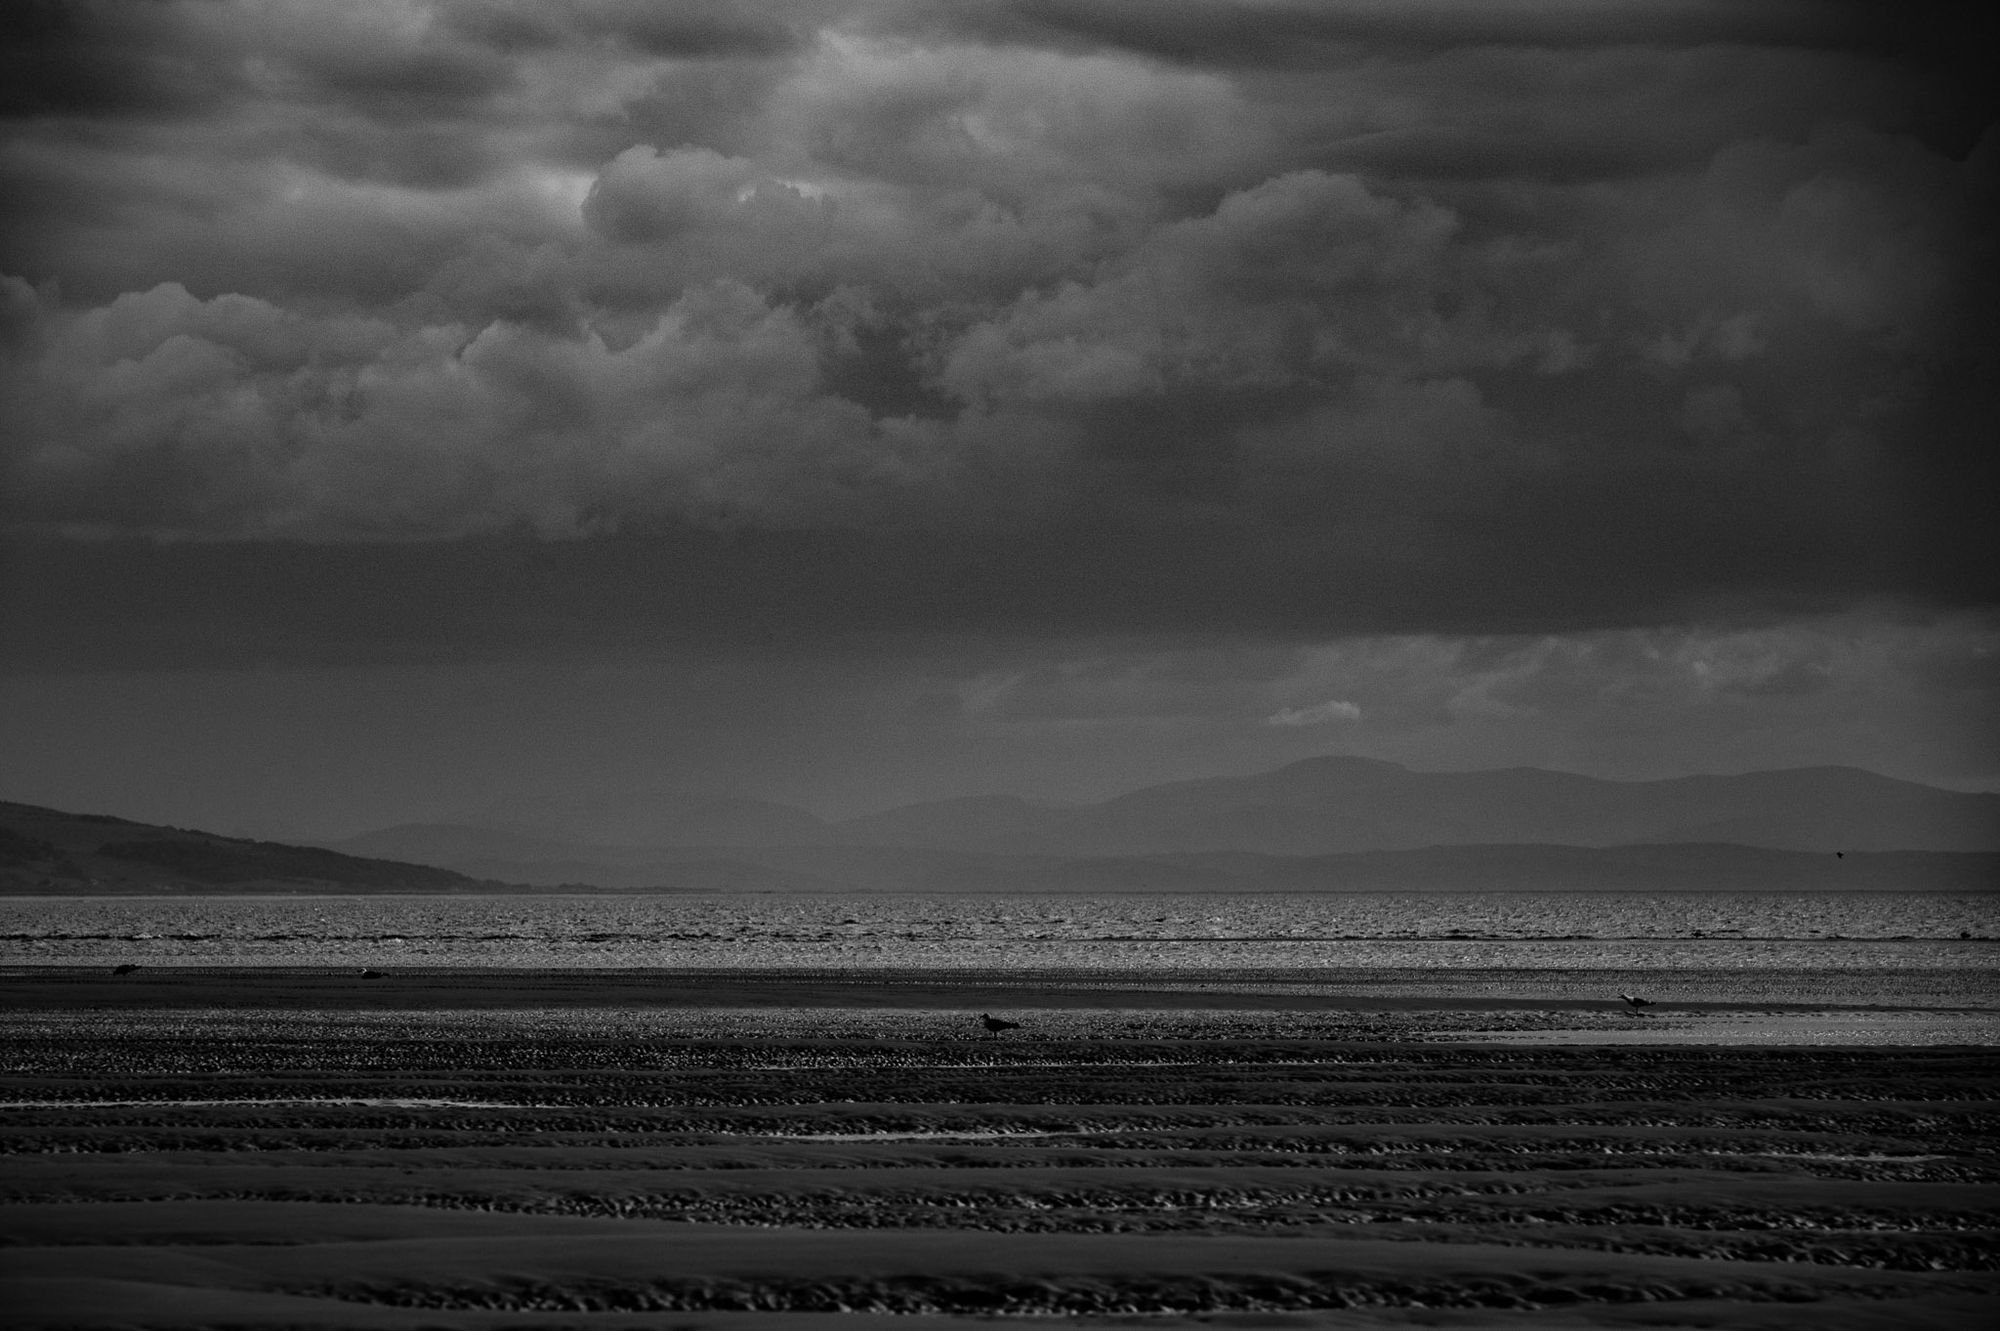 A lone seagull sits on the sand with the sea in the distance. Far away there are mountains.